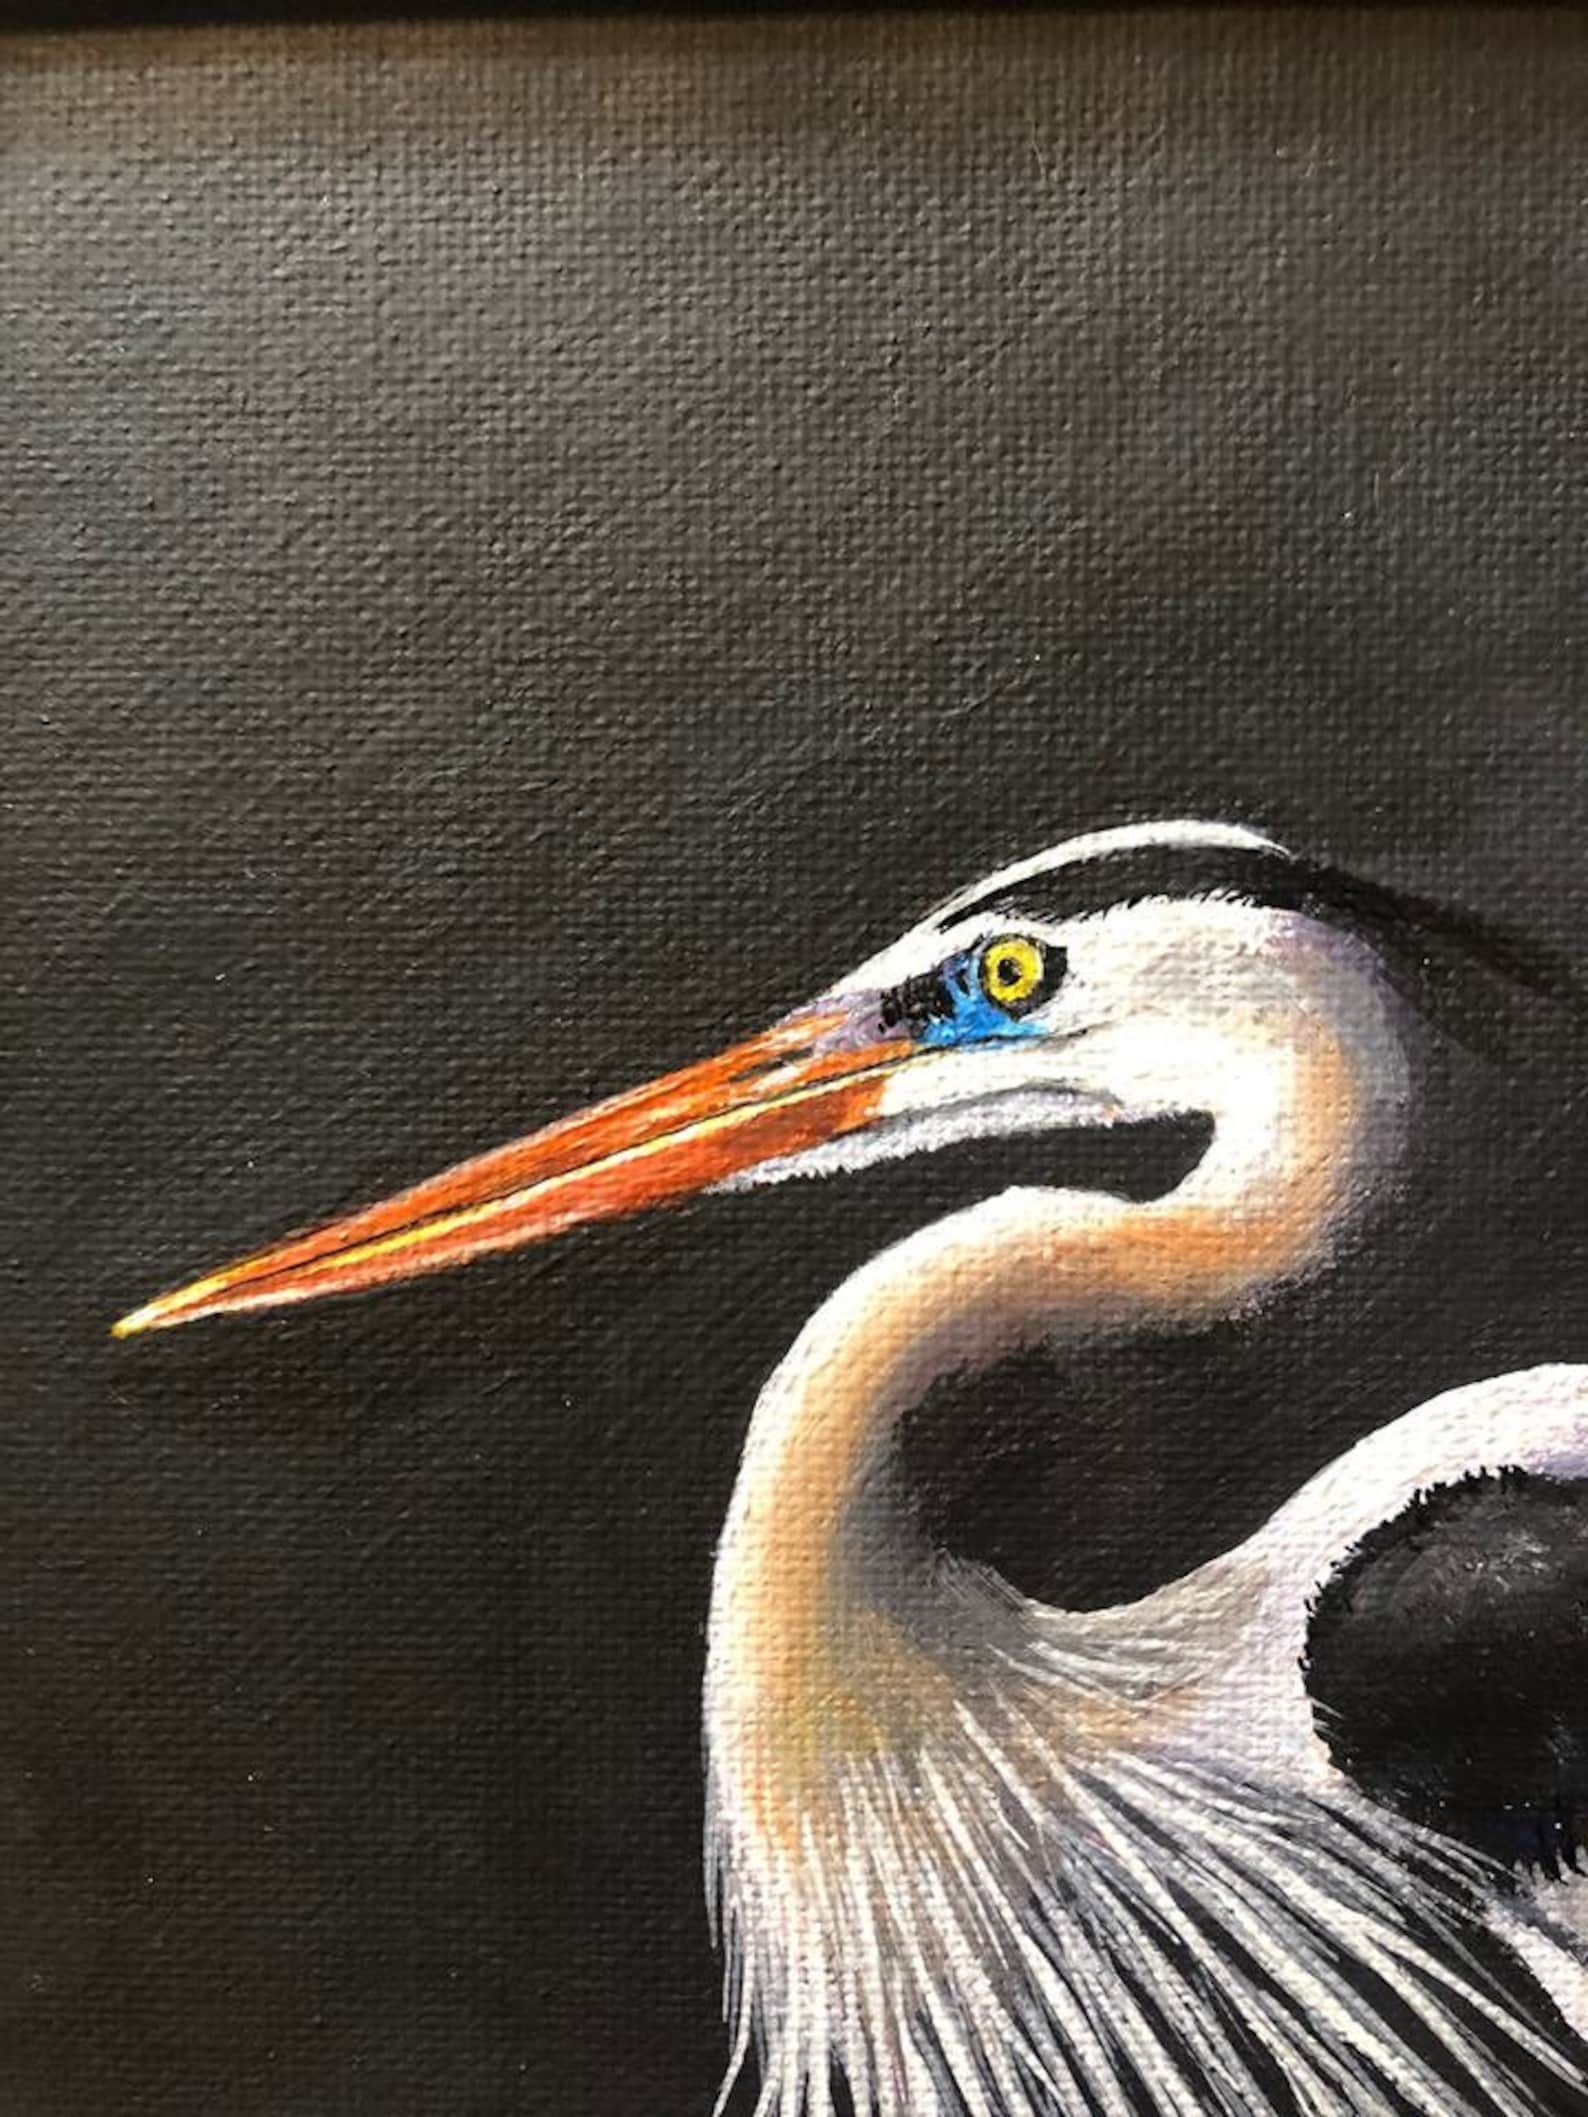 Great Blue Heron Painting Bird Painting Original Framed Art | Etsy With Regard To Most Recently Released Heron Bird Wall Art (View 6 of 20)